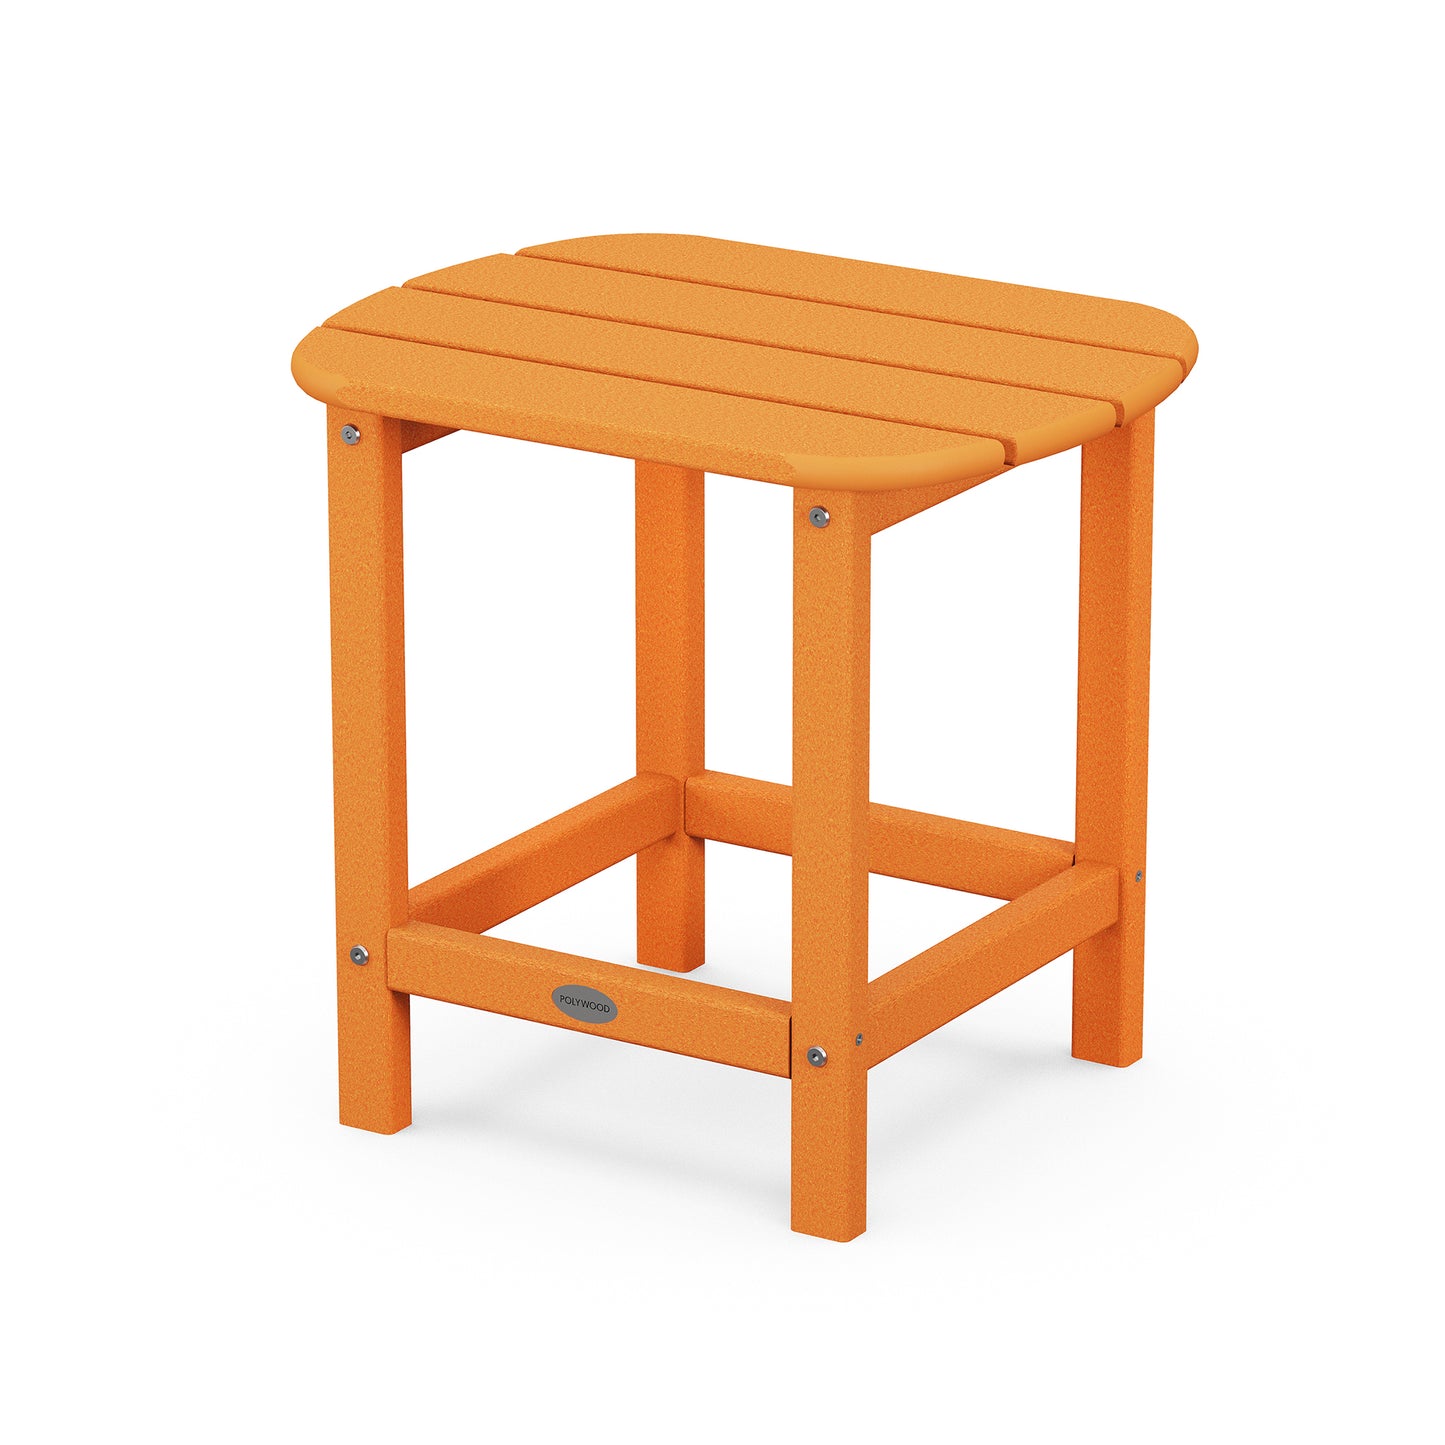 A durable orange POLYWOOD South Beach Adirondack 18" Side Table with a solid flat top and four sturdy legs, isolated on a white background.